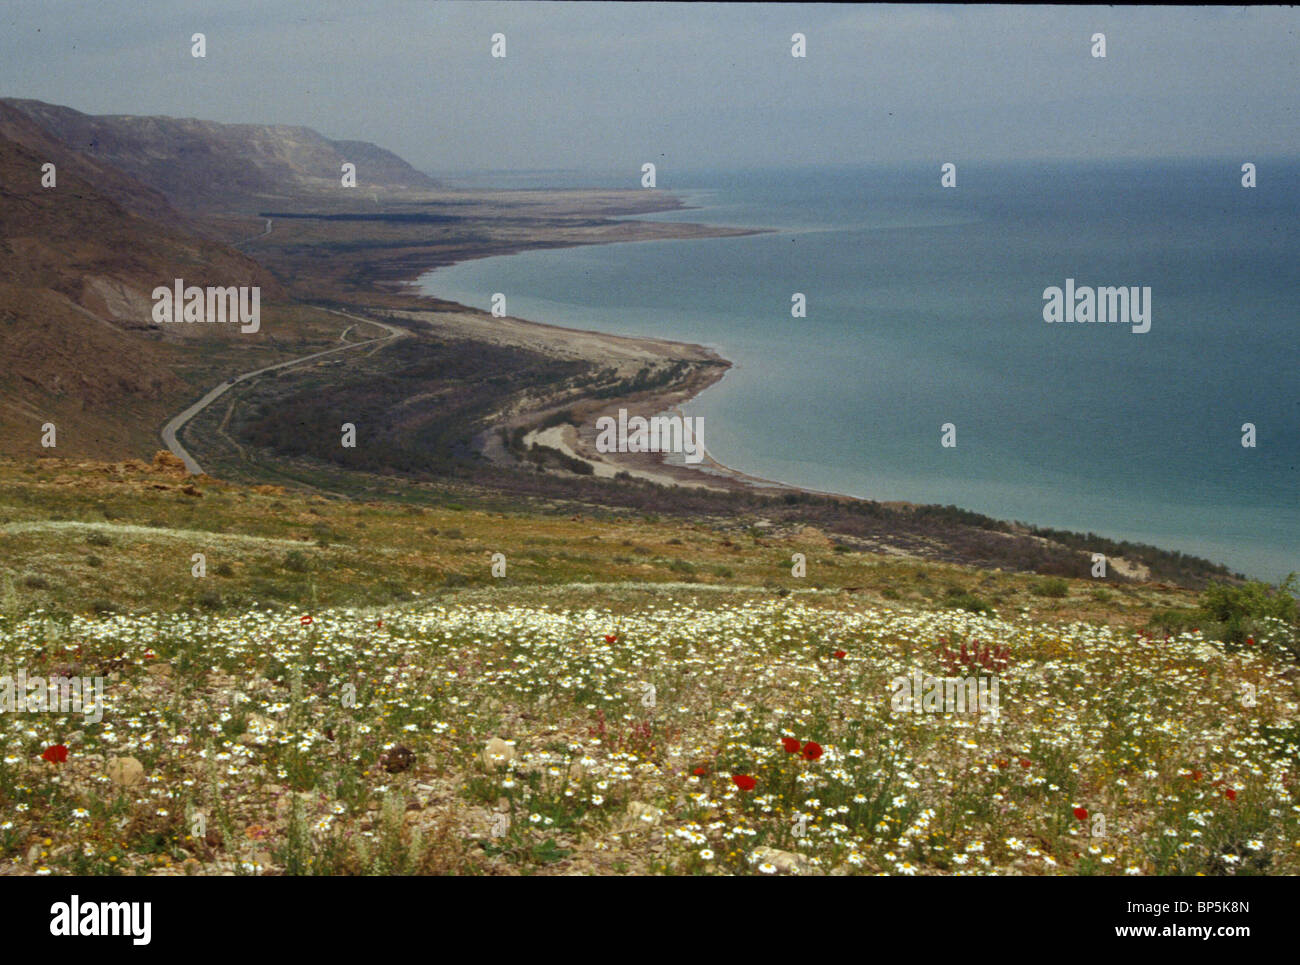 4906 .WESTERN SHORES OF THE DEAD SEA ARE COVERED WITH FLOWERS AFTER AN UNUSUALLY RAINY YEAR Stock Photo